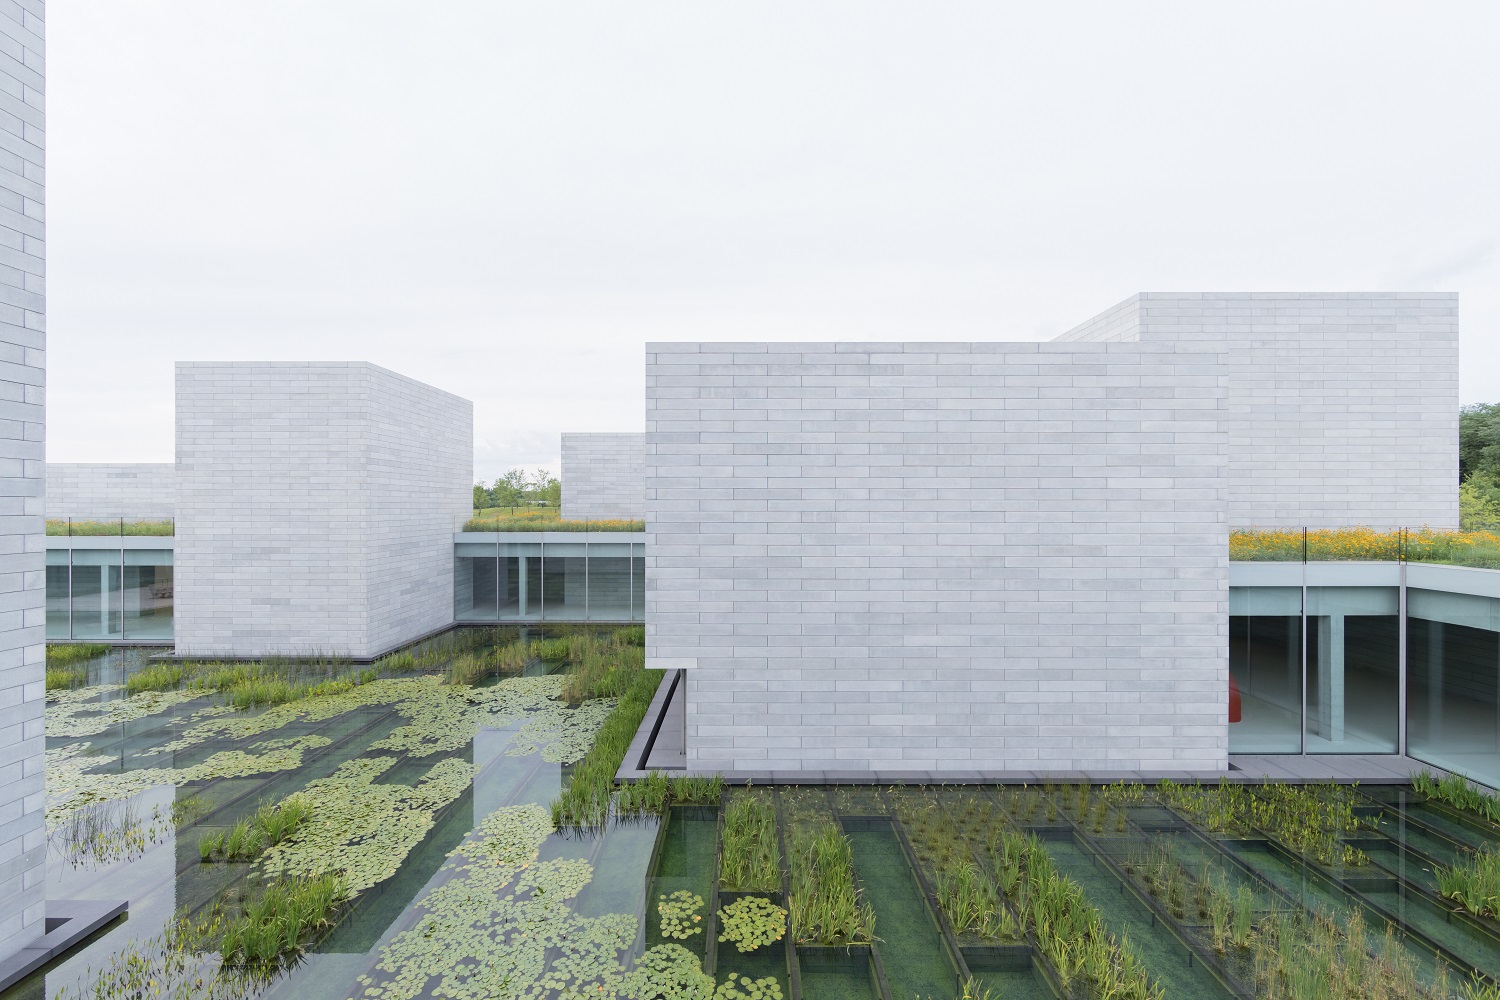 Glenstone Museum - The Pavilions. Image by: Iwan Baan